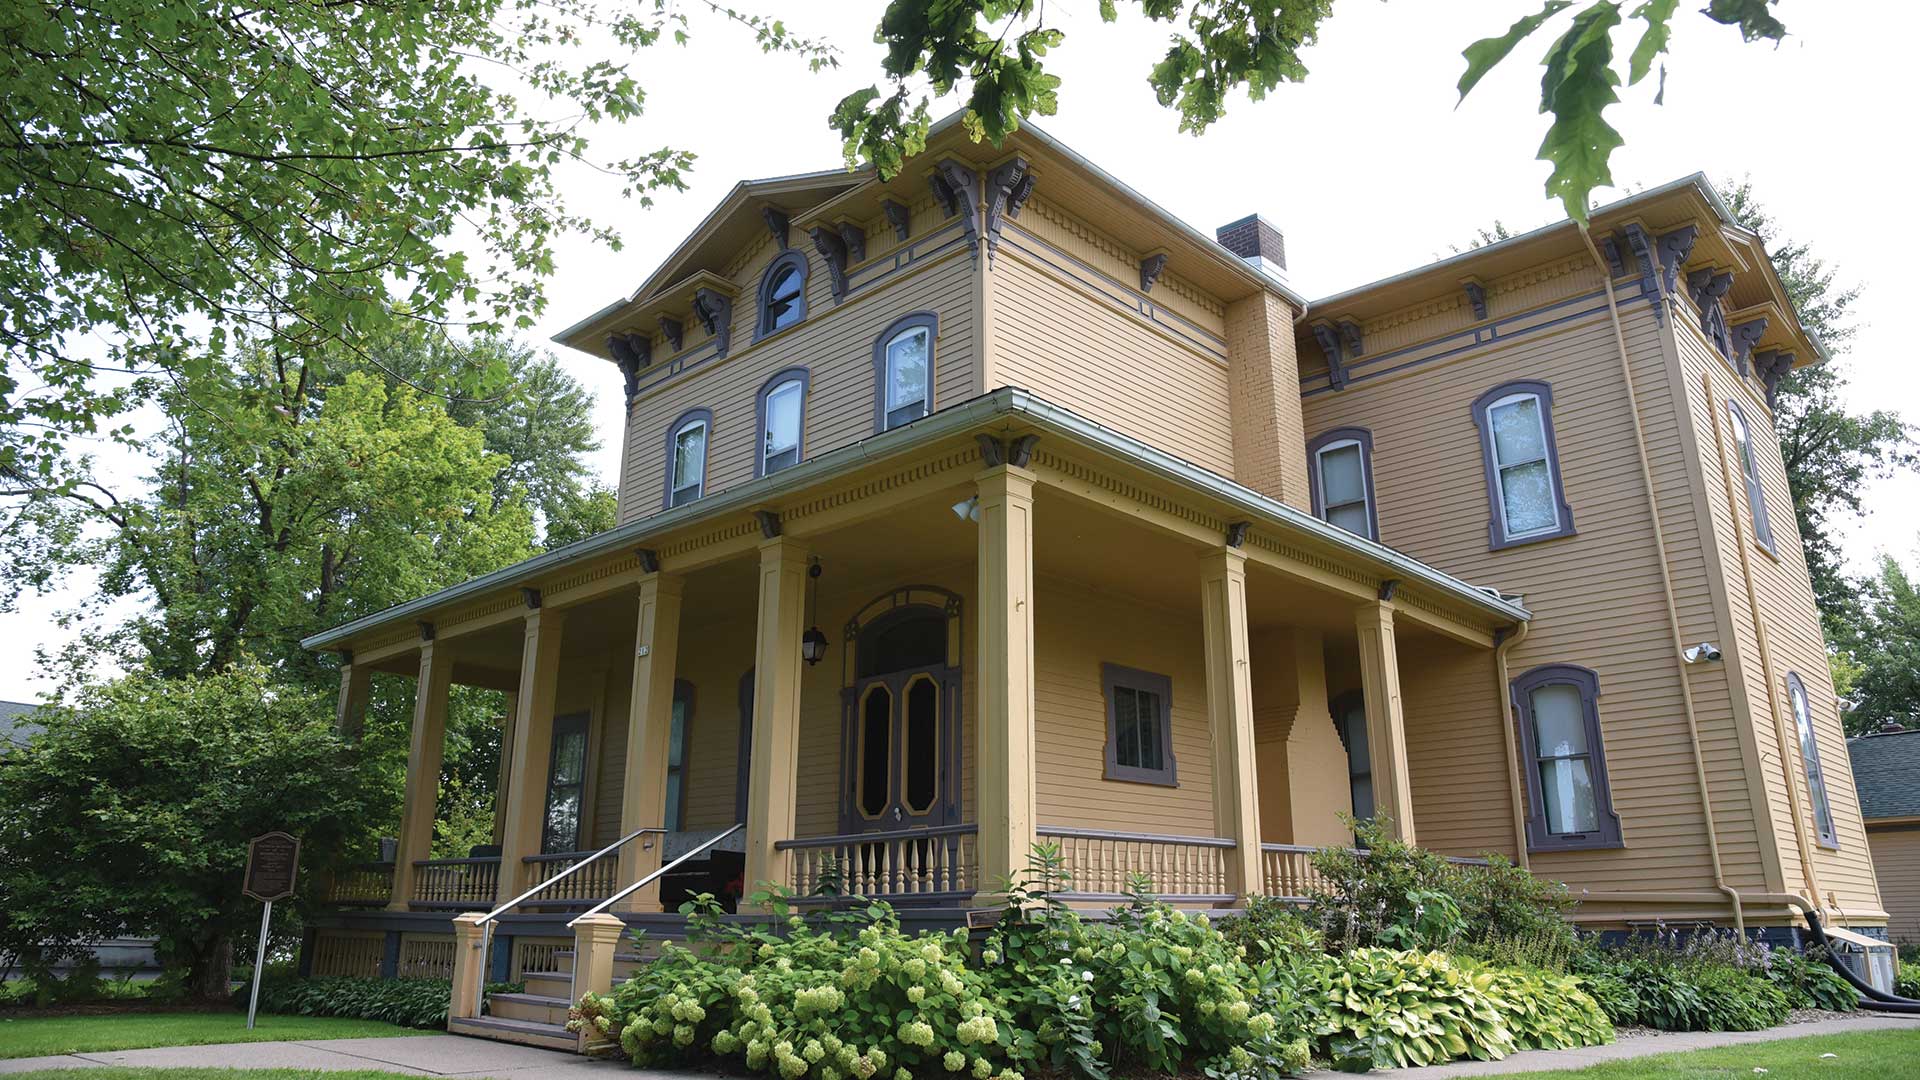 All about the Upham Mansion: Upham Mansion downtown in Marshfield, WI